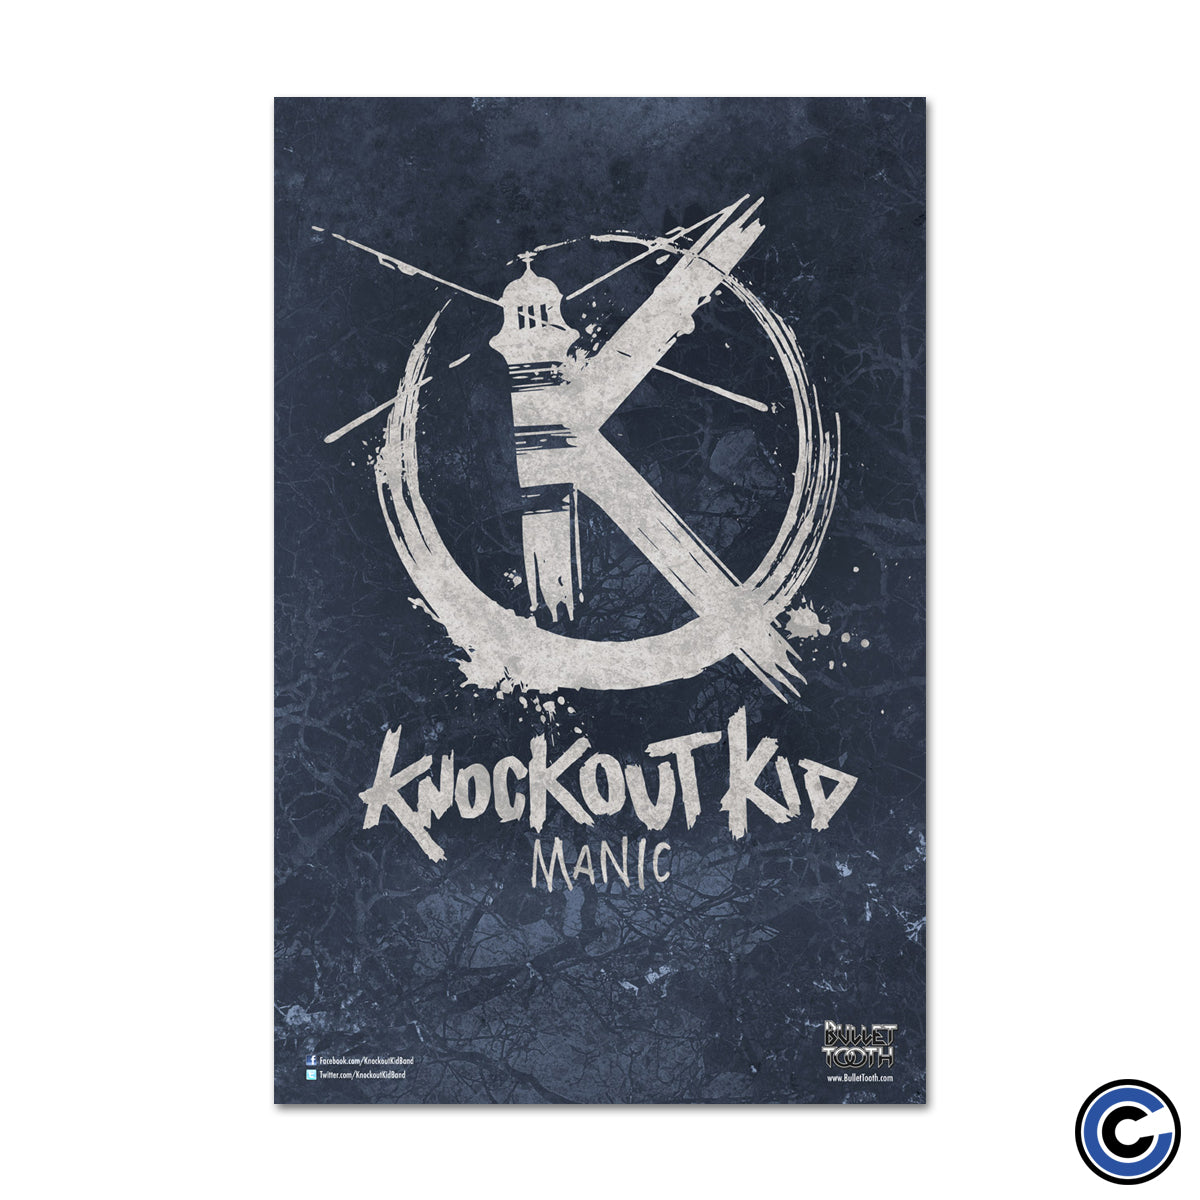 Knockout Kid "Manic" Poster